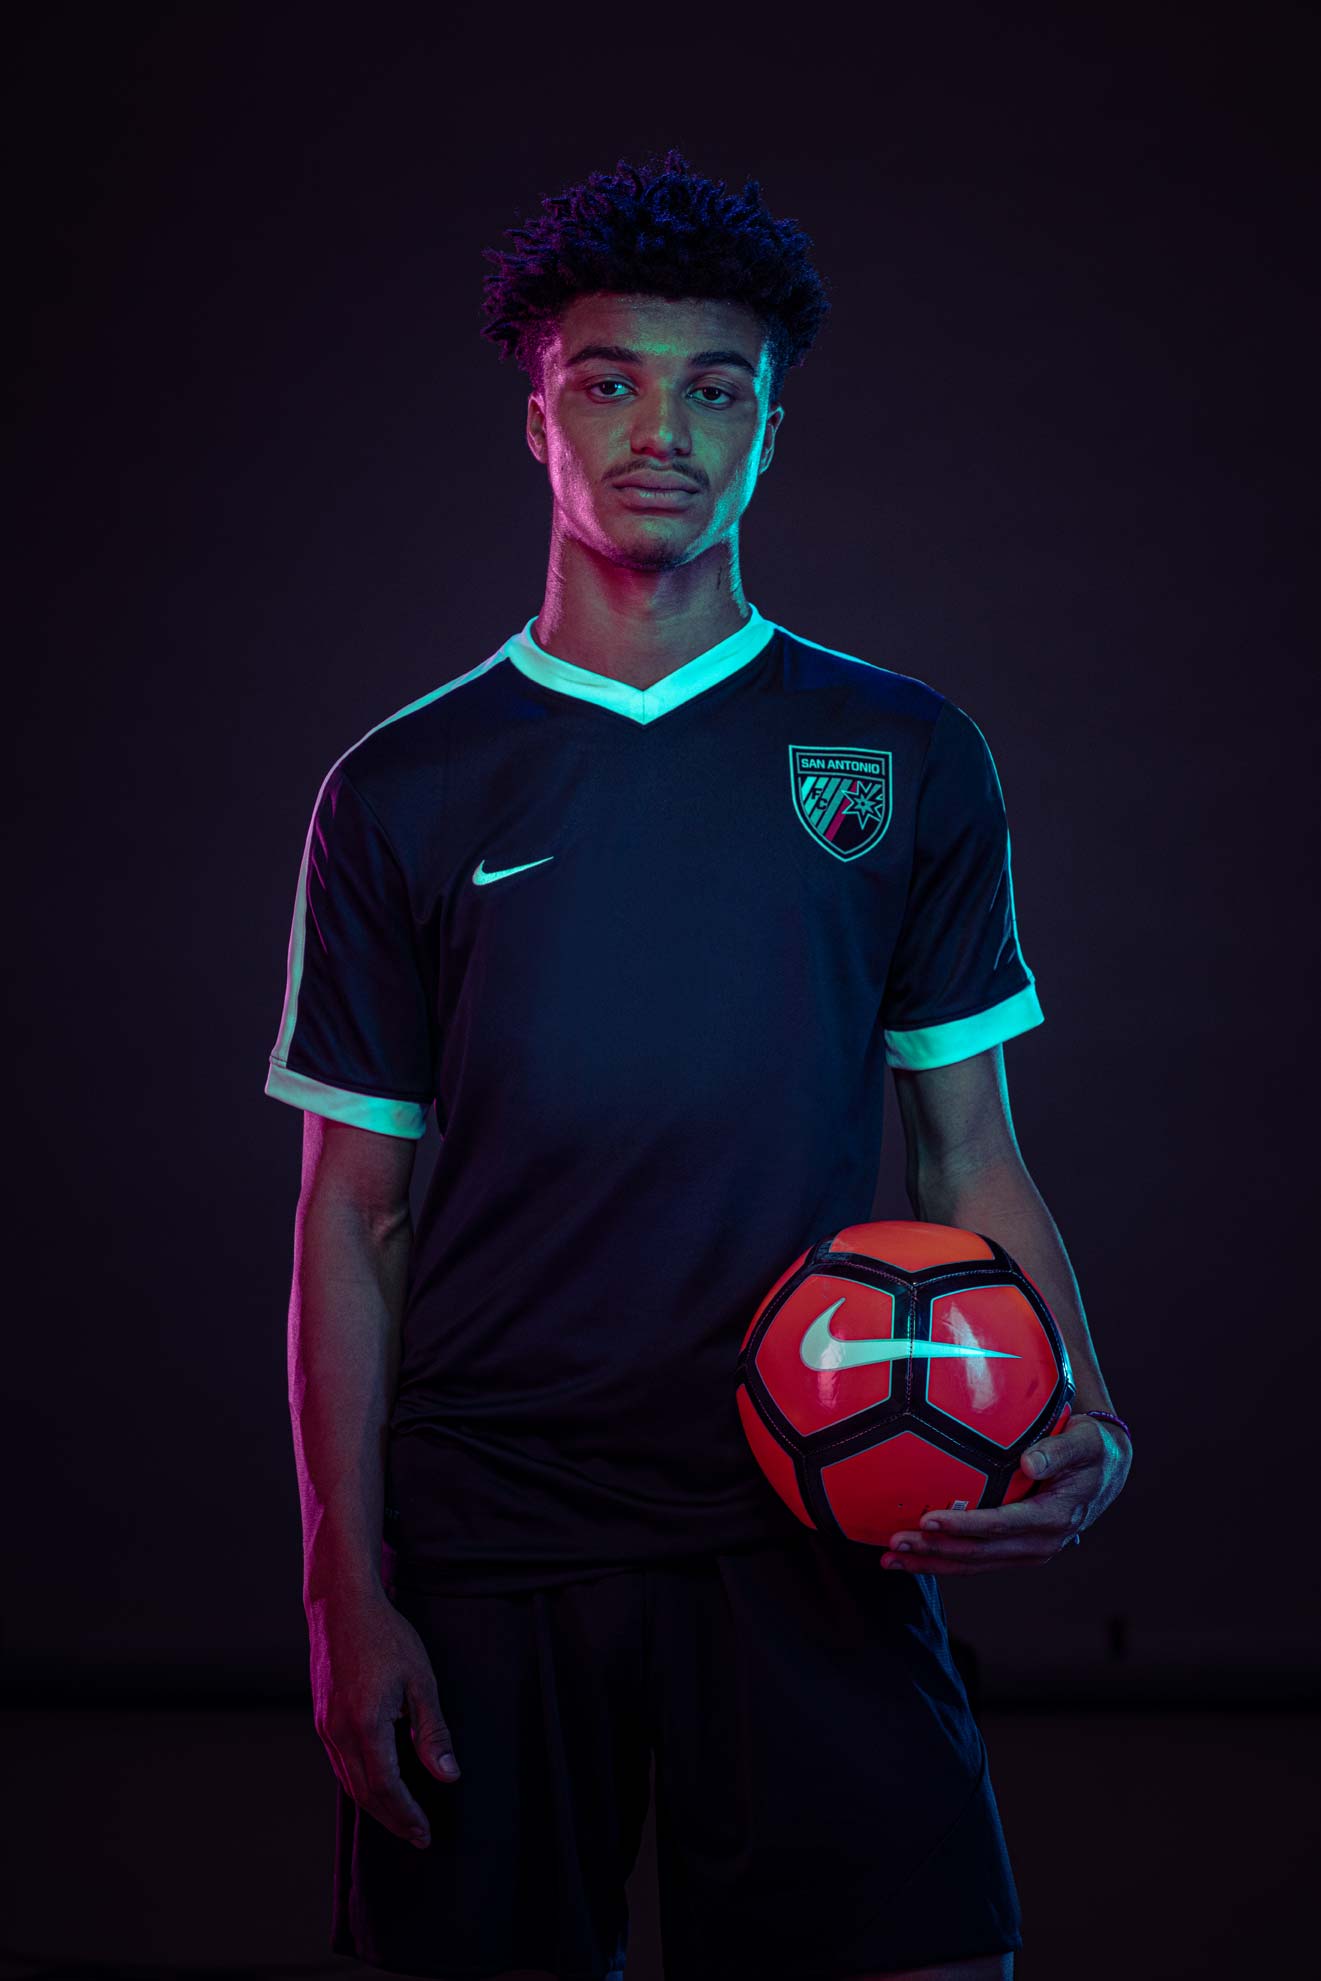 A soccer player standing and holding a Nike soccer ball in front of a dark background